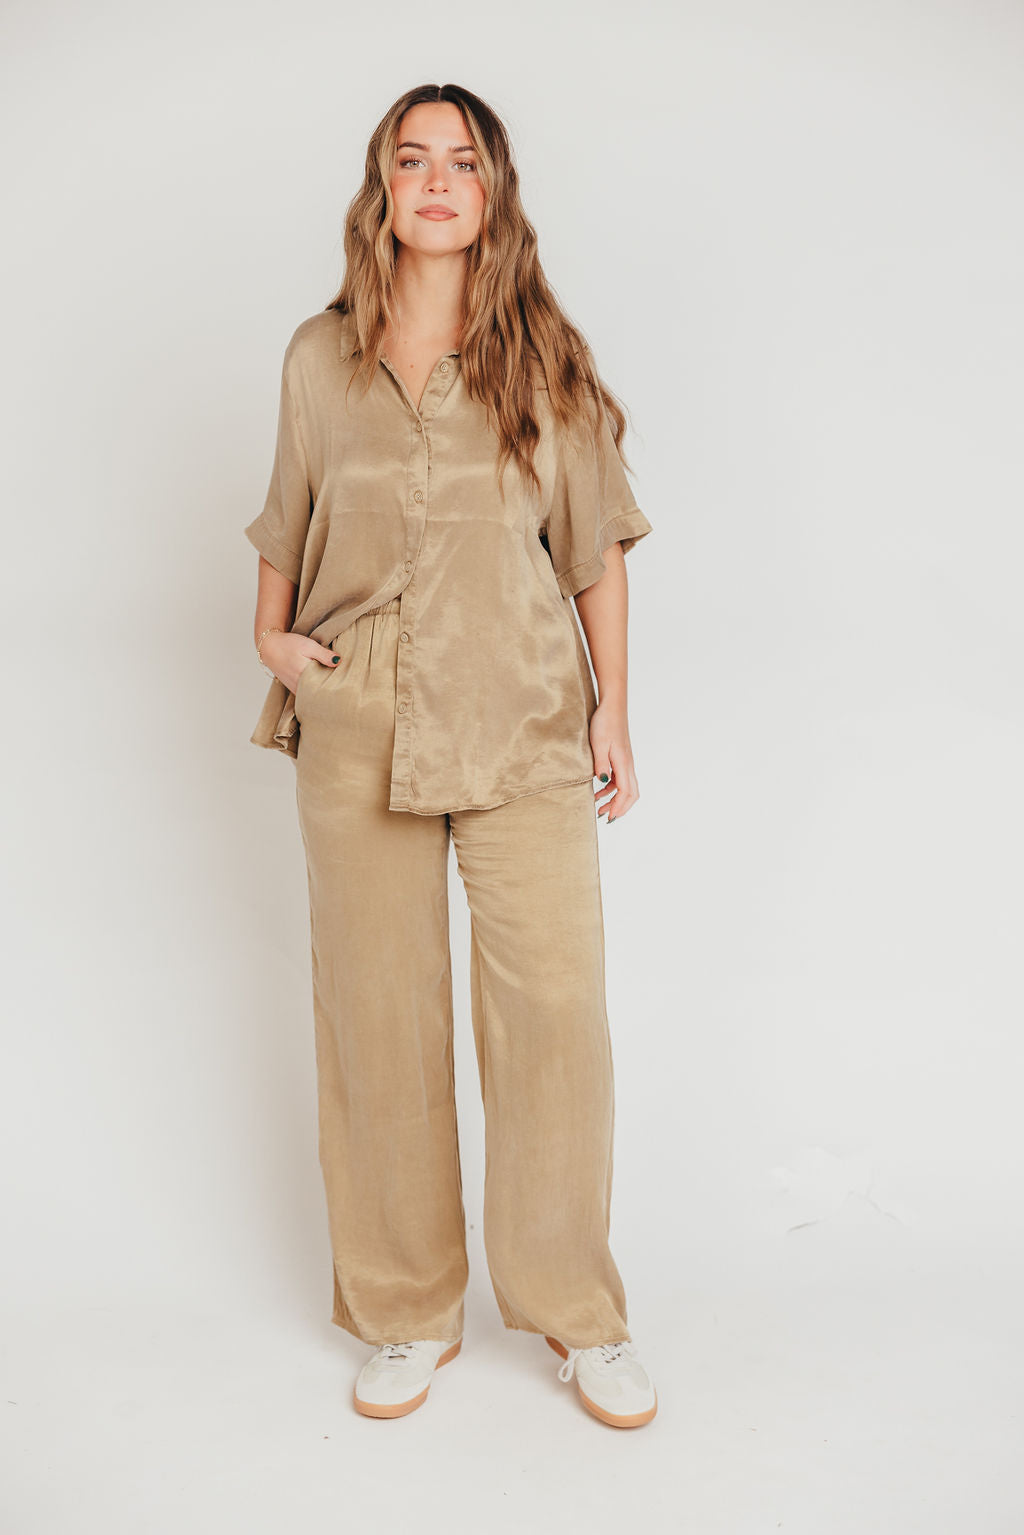 Axel Buttery Soft Button-Up Top in Toffee - Nursing Friendly